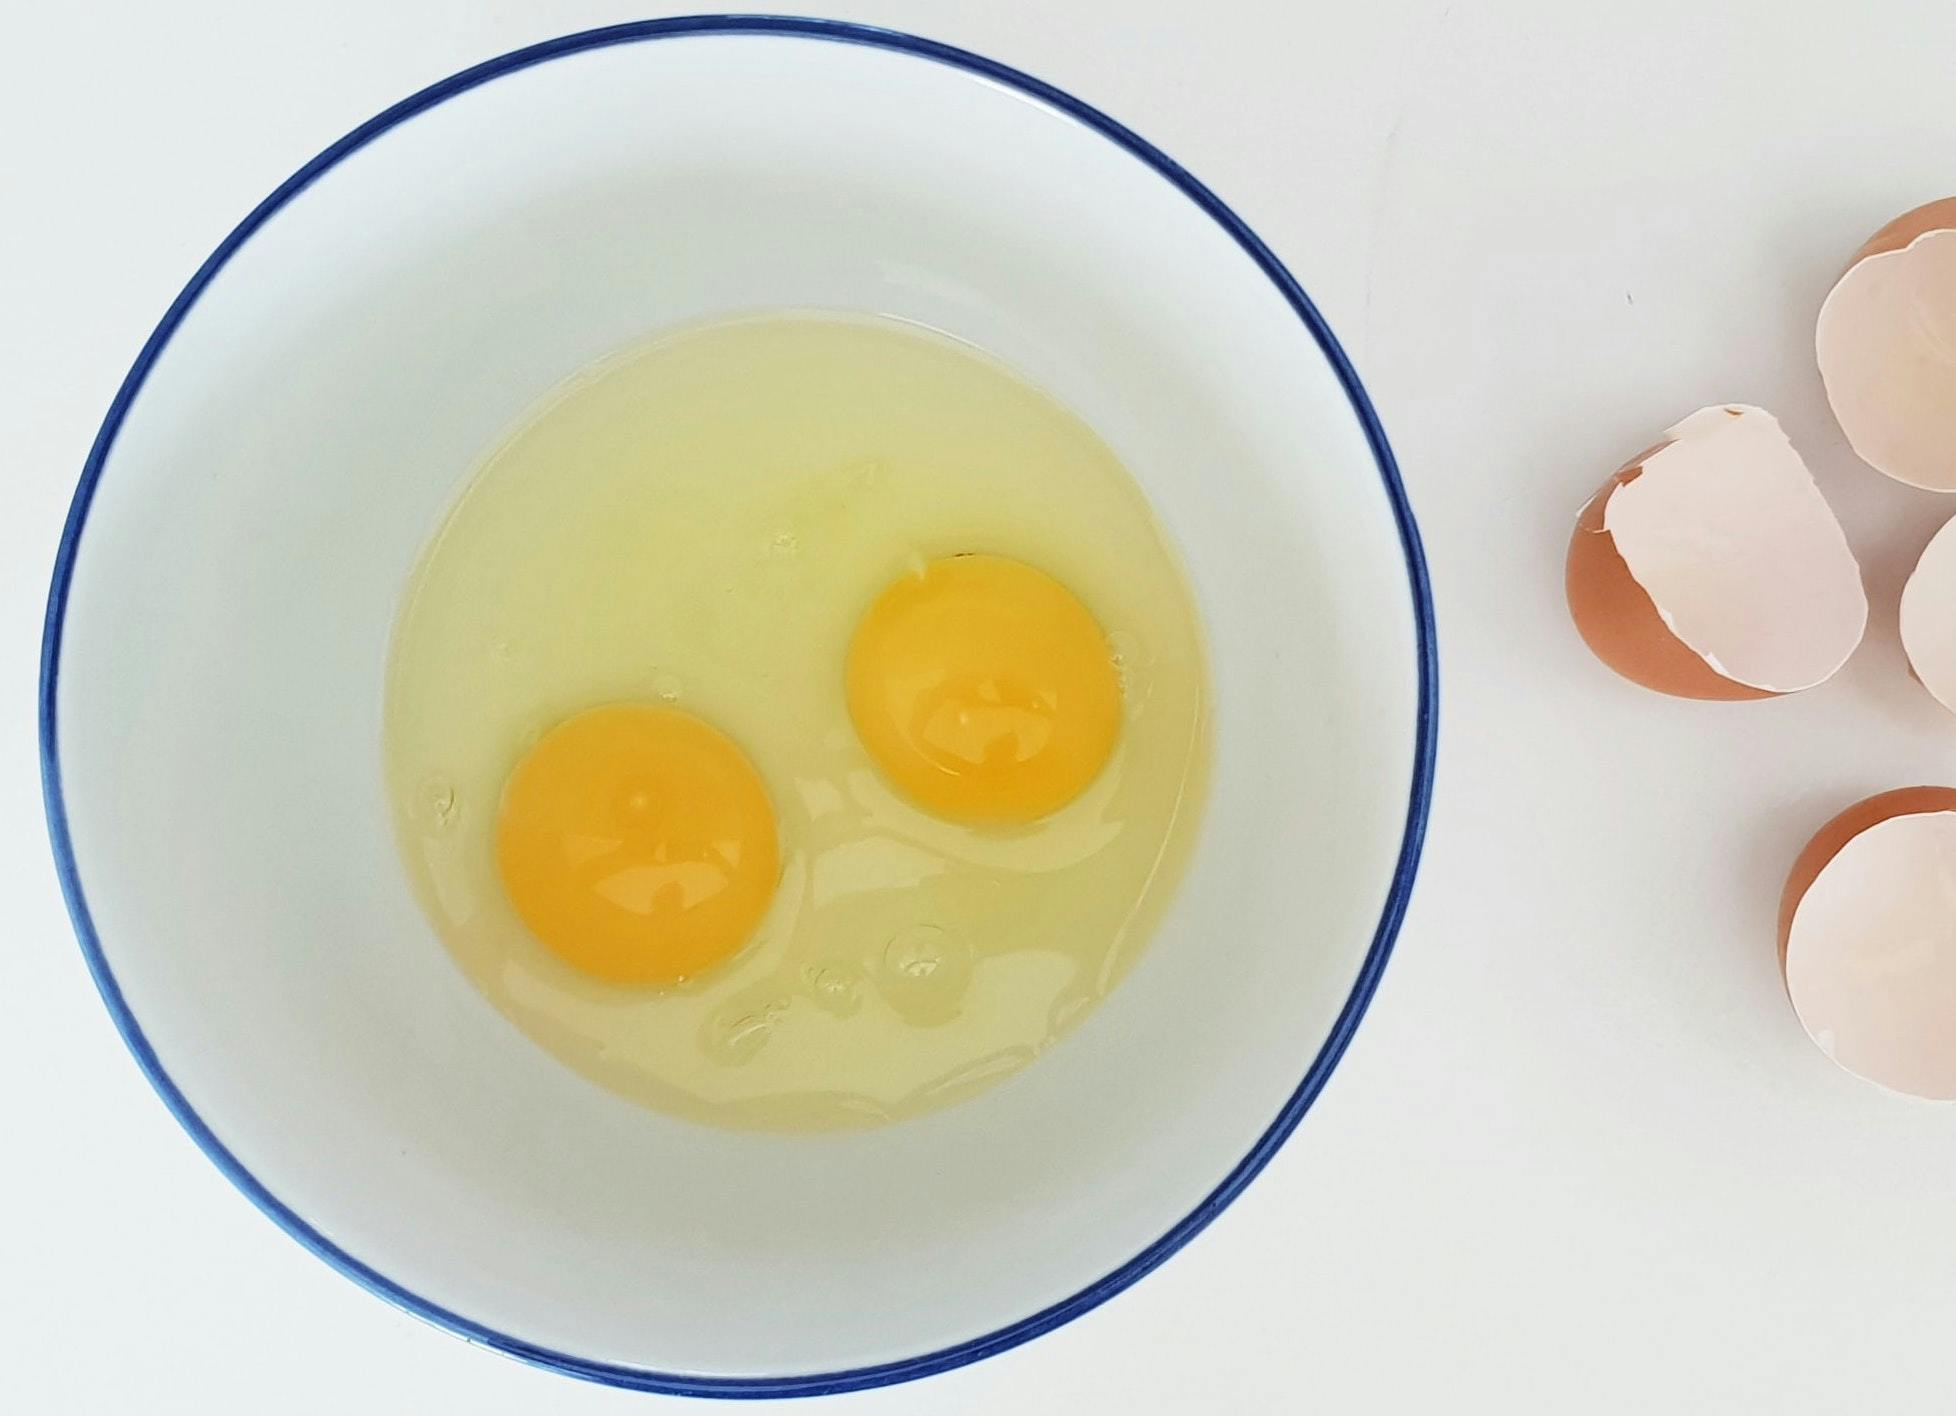 What Are The Healthiest Ways To Eat Eggs?